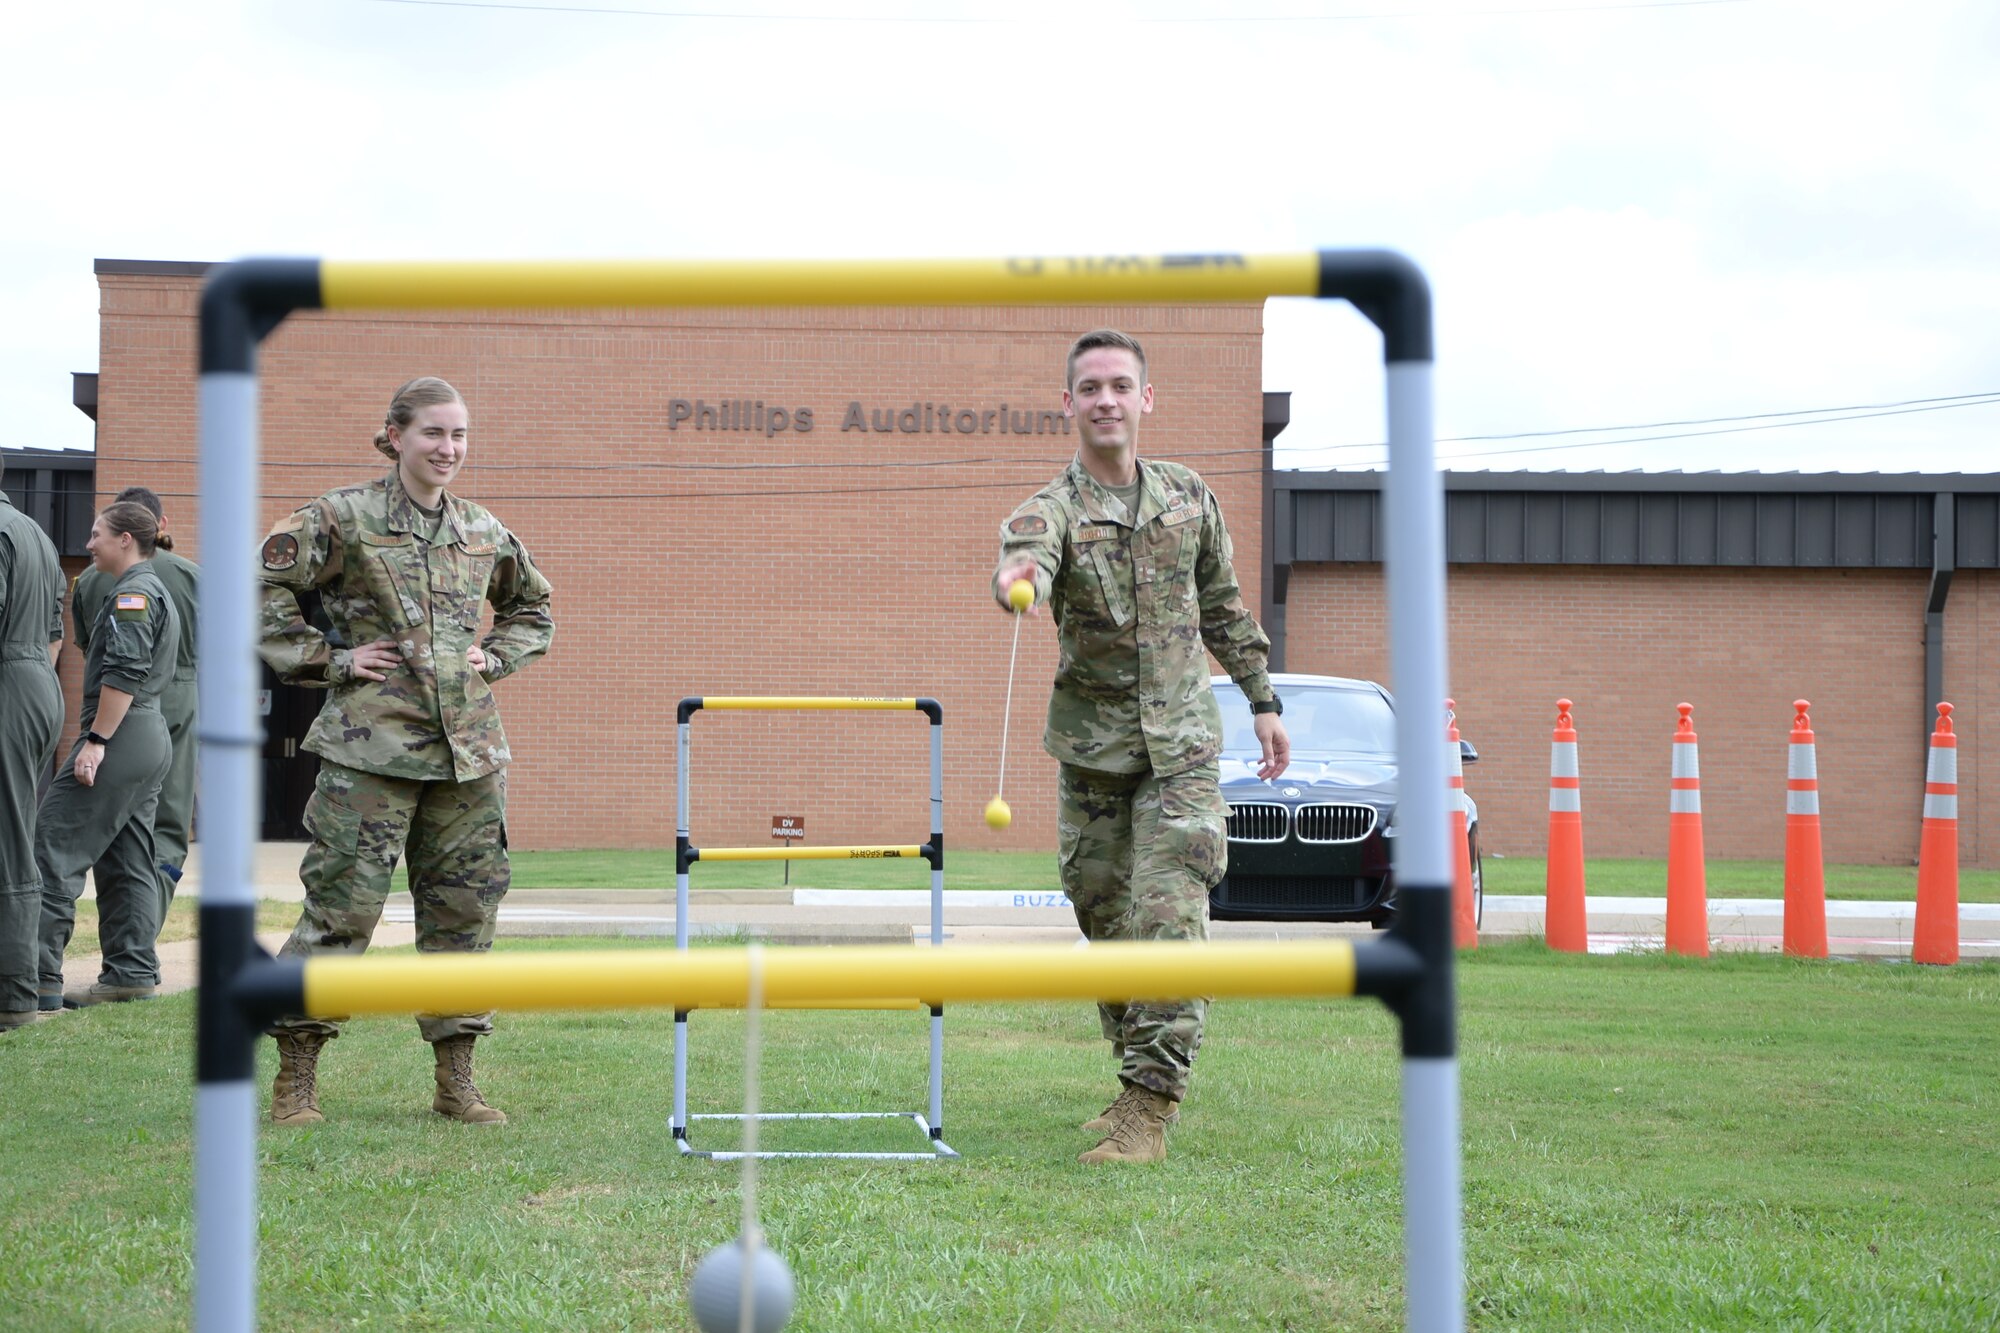 2nd Lts. Stefanie Polivka and Andrew Huxhold play ladder golf Aug. 22, 2019 on Columbus Air Force Base, Mississippi. Units on base utilized the Tactical Pause, directed by Chief of Staff of the Air Force Gen. David L. Goldfein, to relax and connect with each other. (U.S. Air Force photo by Senior Airman Beaux Hebert)